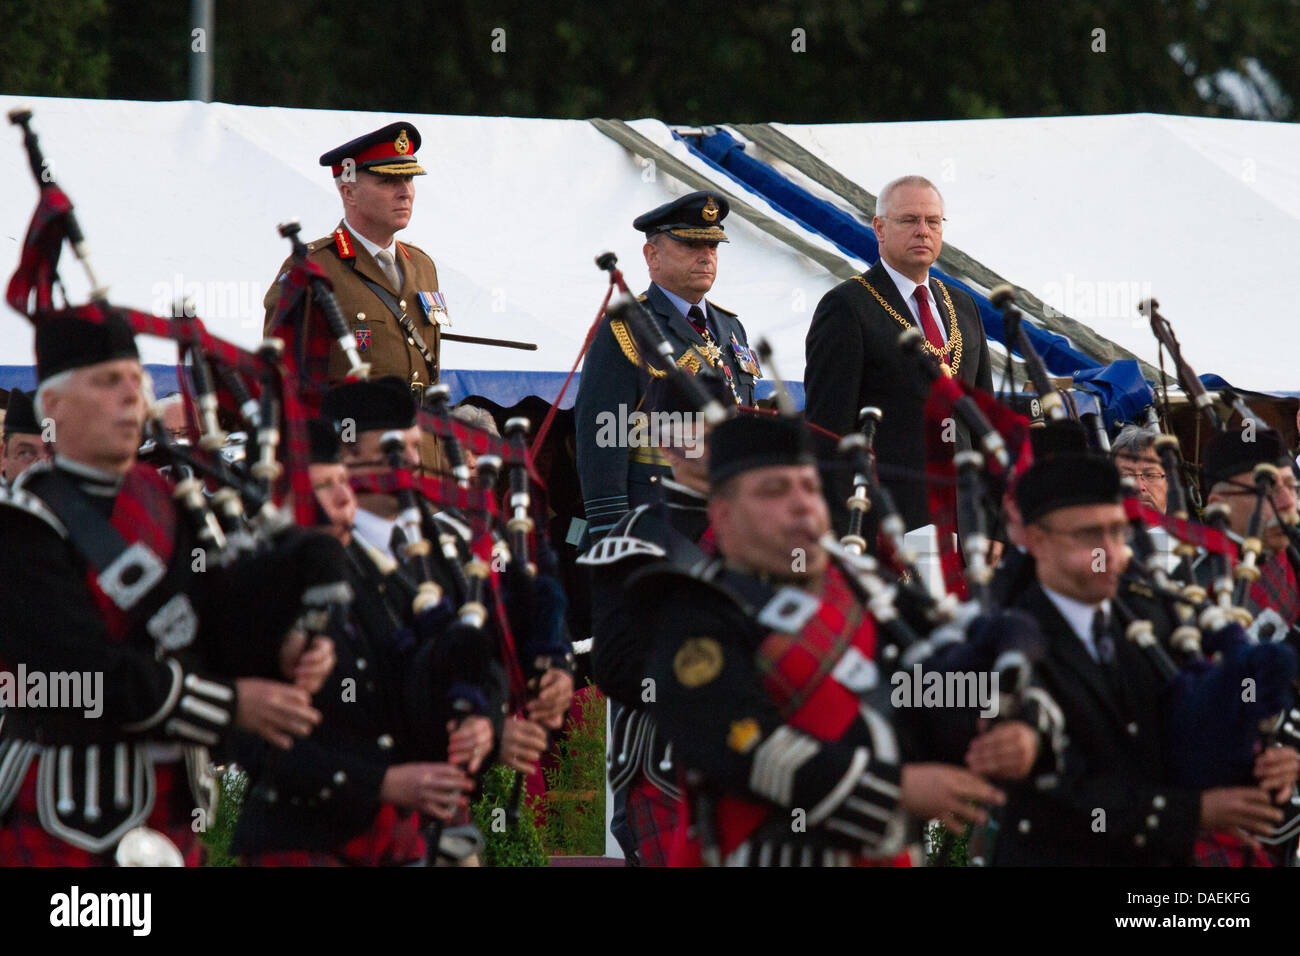 Bands from the British and German armies perform a Beating Retreat ceremony in front of Air Chief Marshal Sir Stuart Peach, Vice Chief of the Defence Staff (centre), the Mayor of Mönchengladbach, Norbert Bude (right) and the General Officer Commanding British Forces Germany, Major General John Henderson (left) at the Rheindahlen Military Complex, Germany Stock Photo